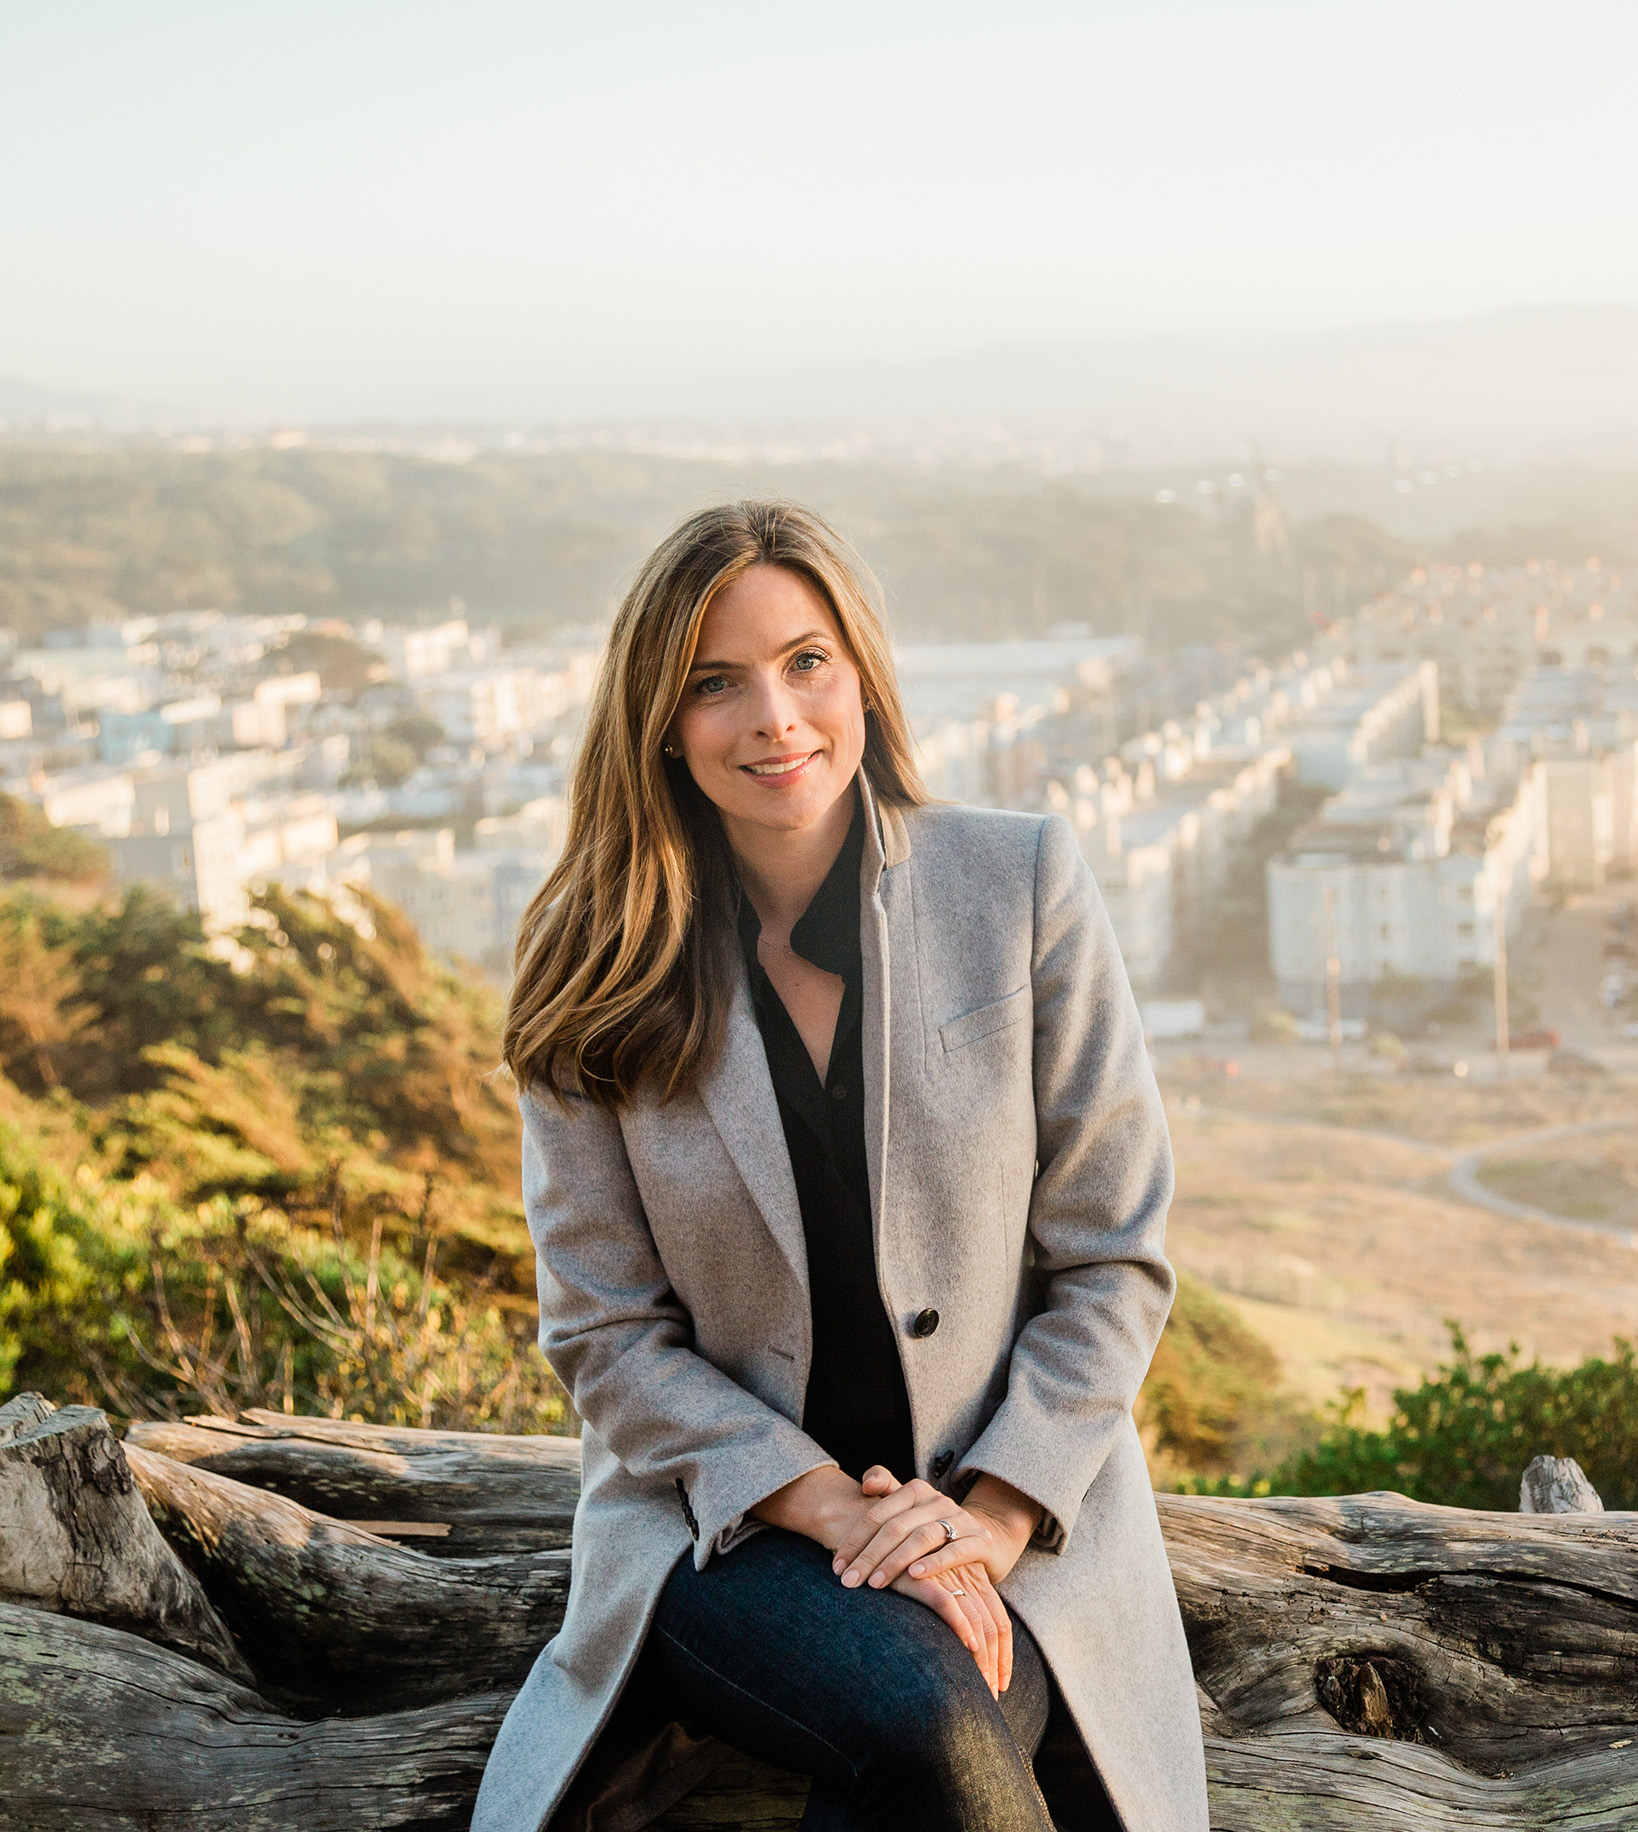 View of Shannon Hughes seated outside with San Francisco visible in the background